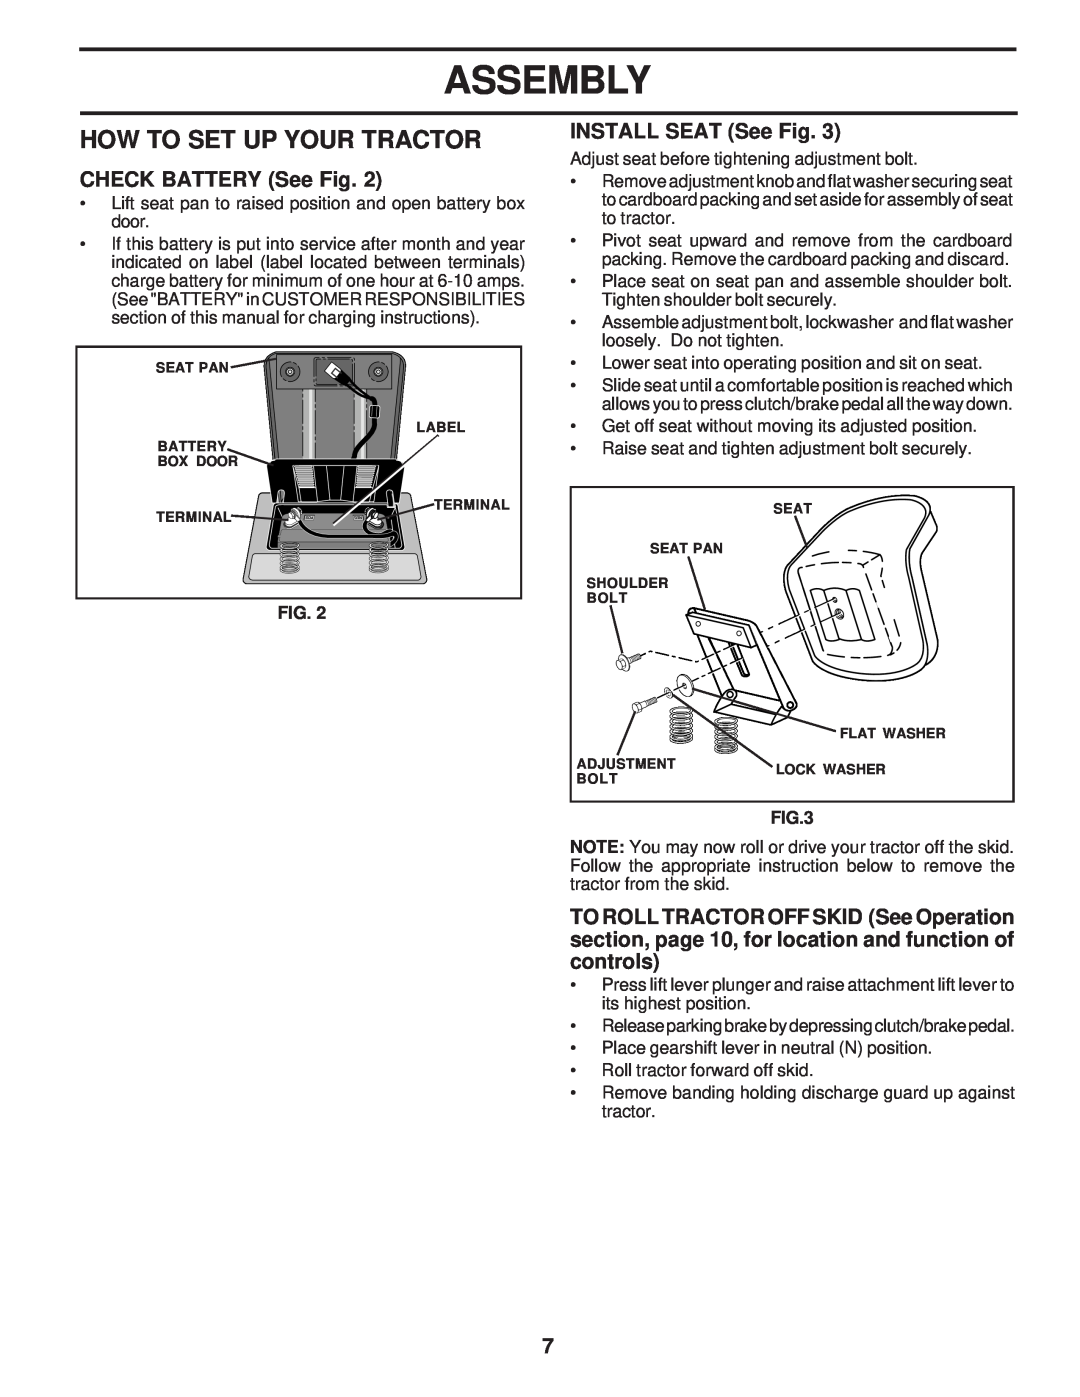 Weed Eater 174193, WE12542F owner manual How To Set Up Your Tractor, CHECK BATTERY See Fig, INSTALL SEAT See Fig, Assembly 